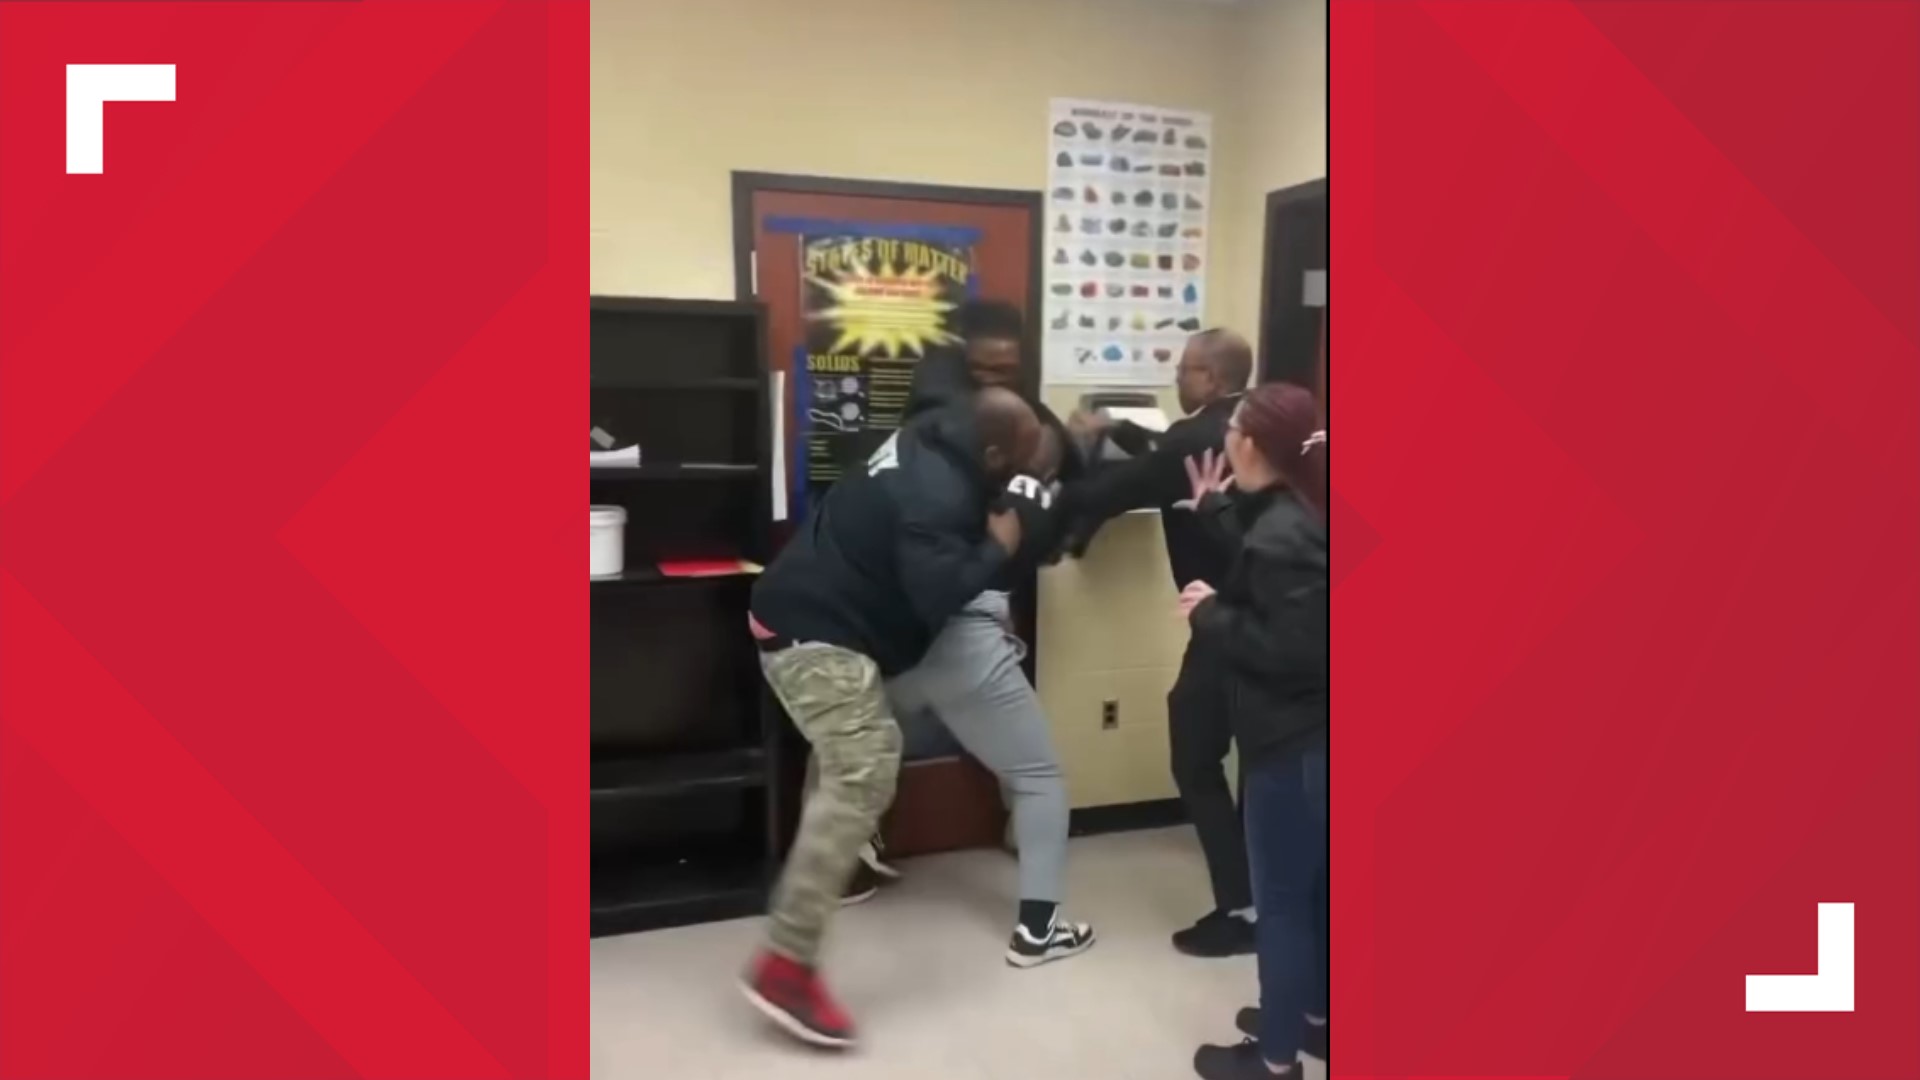 Both the safety monitor and teacher involved in the altercation will be placed on leave during an investigation, according to the Harrisburg School District.